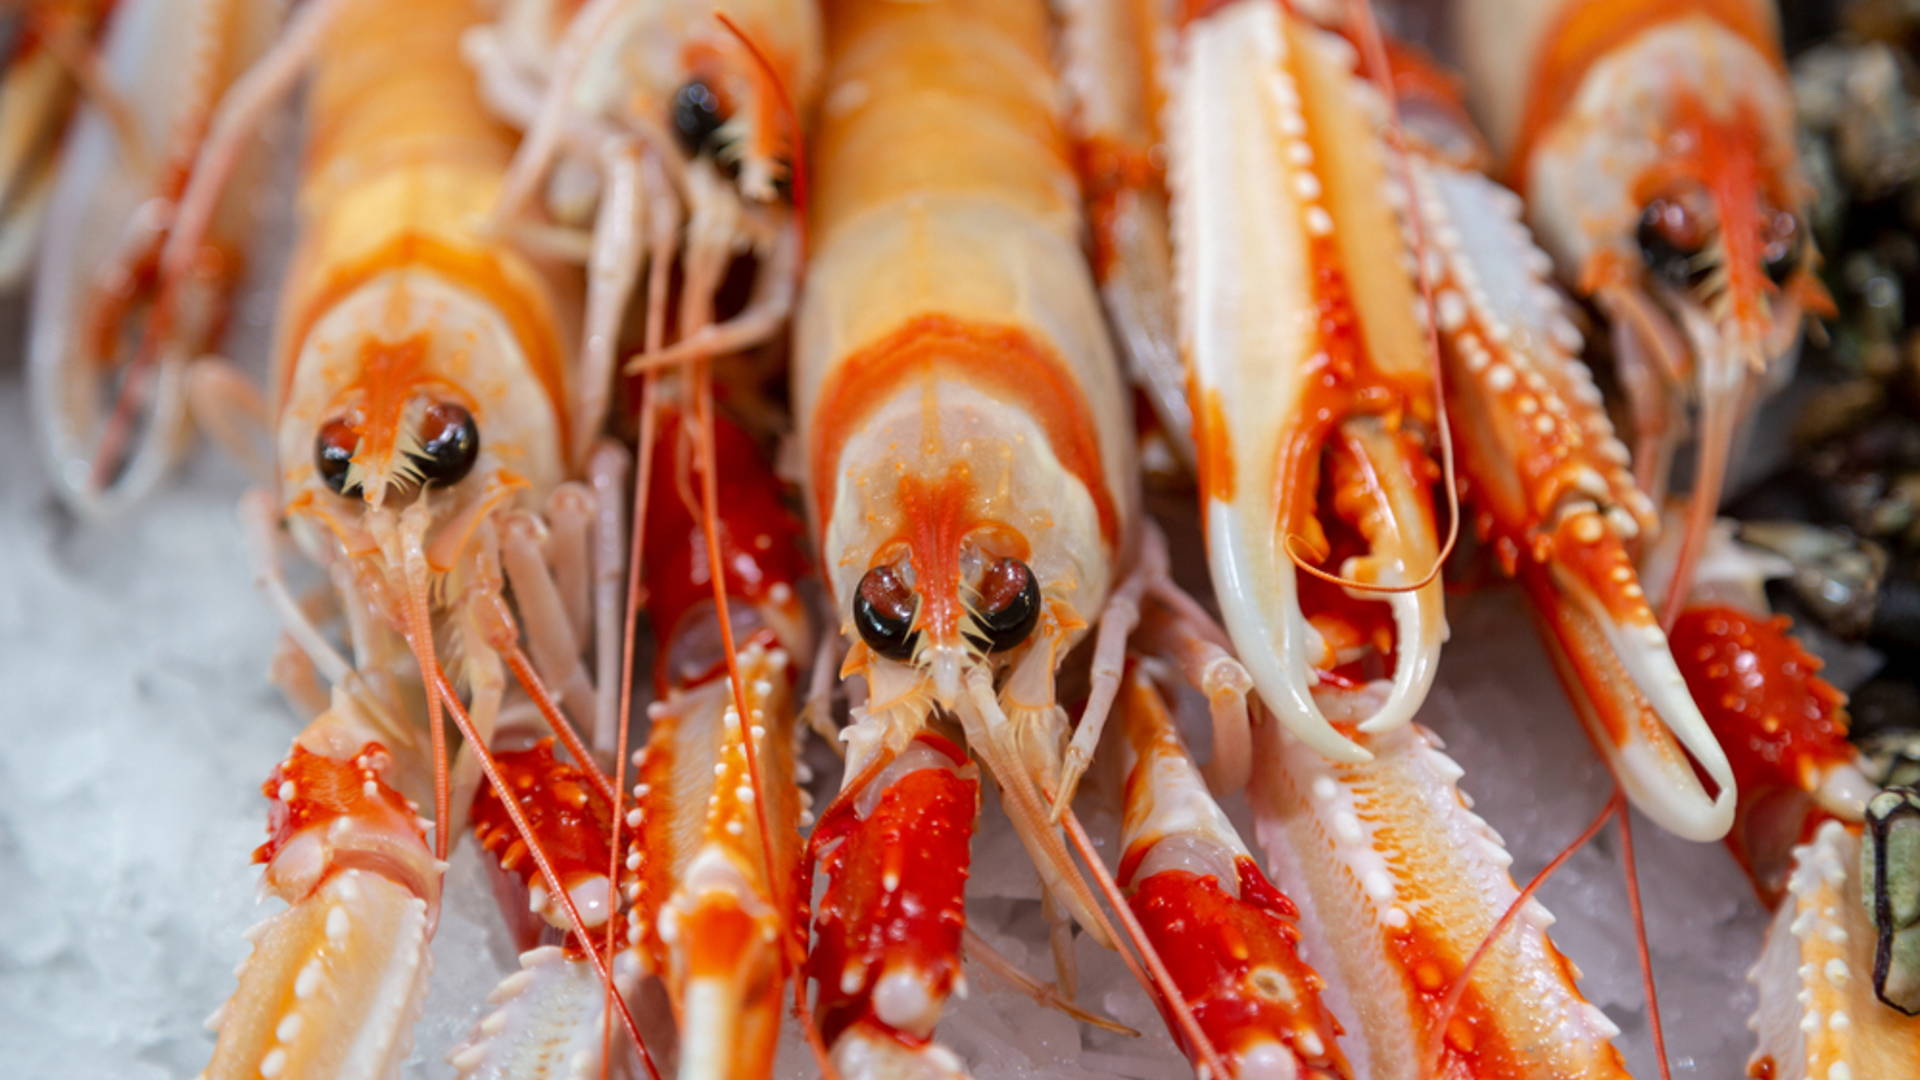 Featured image for British Grocer Waitrose And Biotech Company Developing Packaging From Langoustine Shells